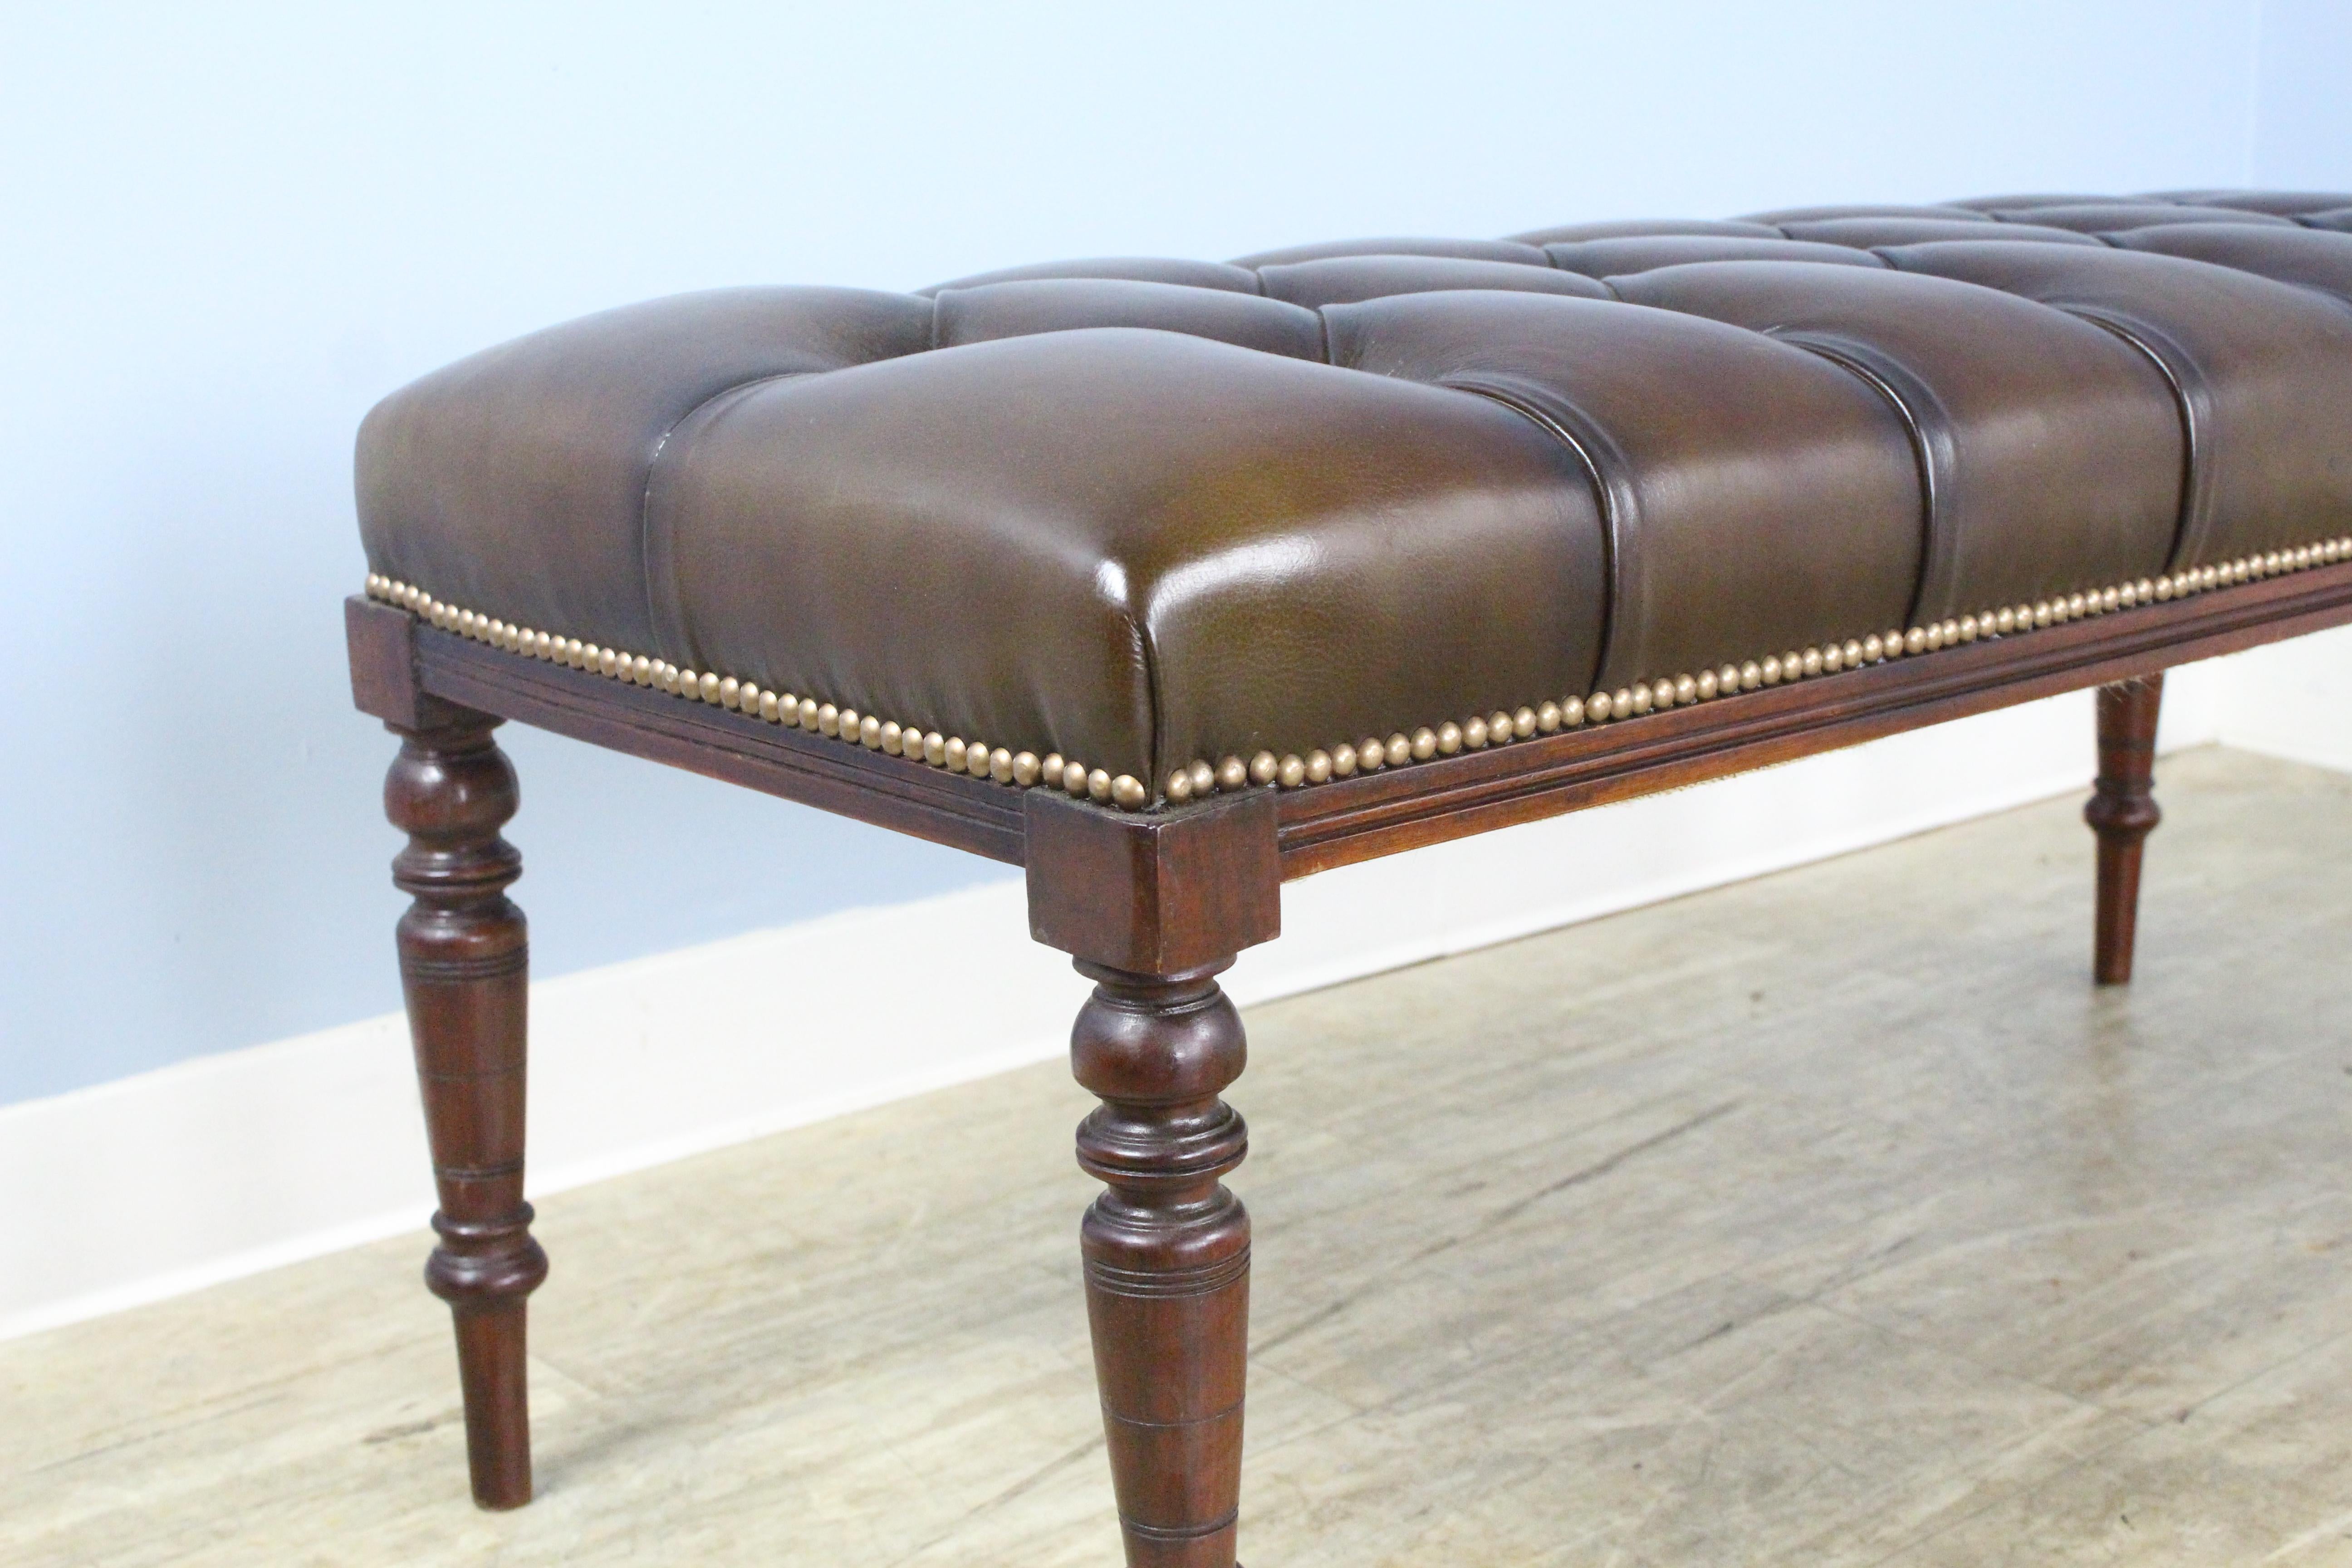 Antique Tufted Leather Stool In Good Condition For Sale In Port Chester, NY